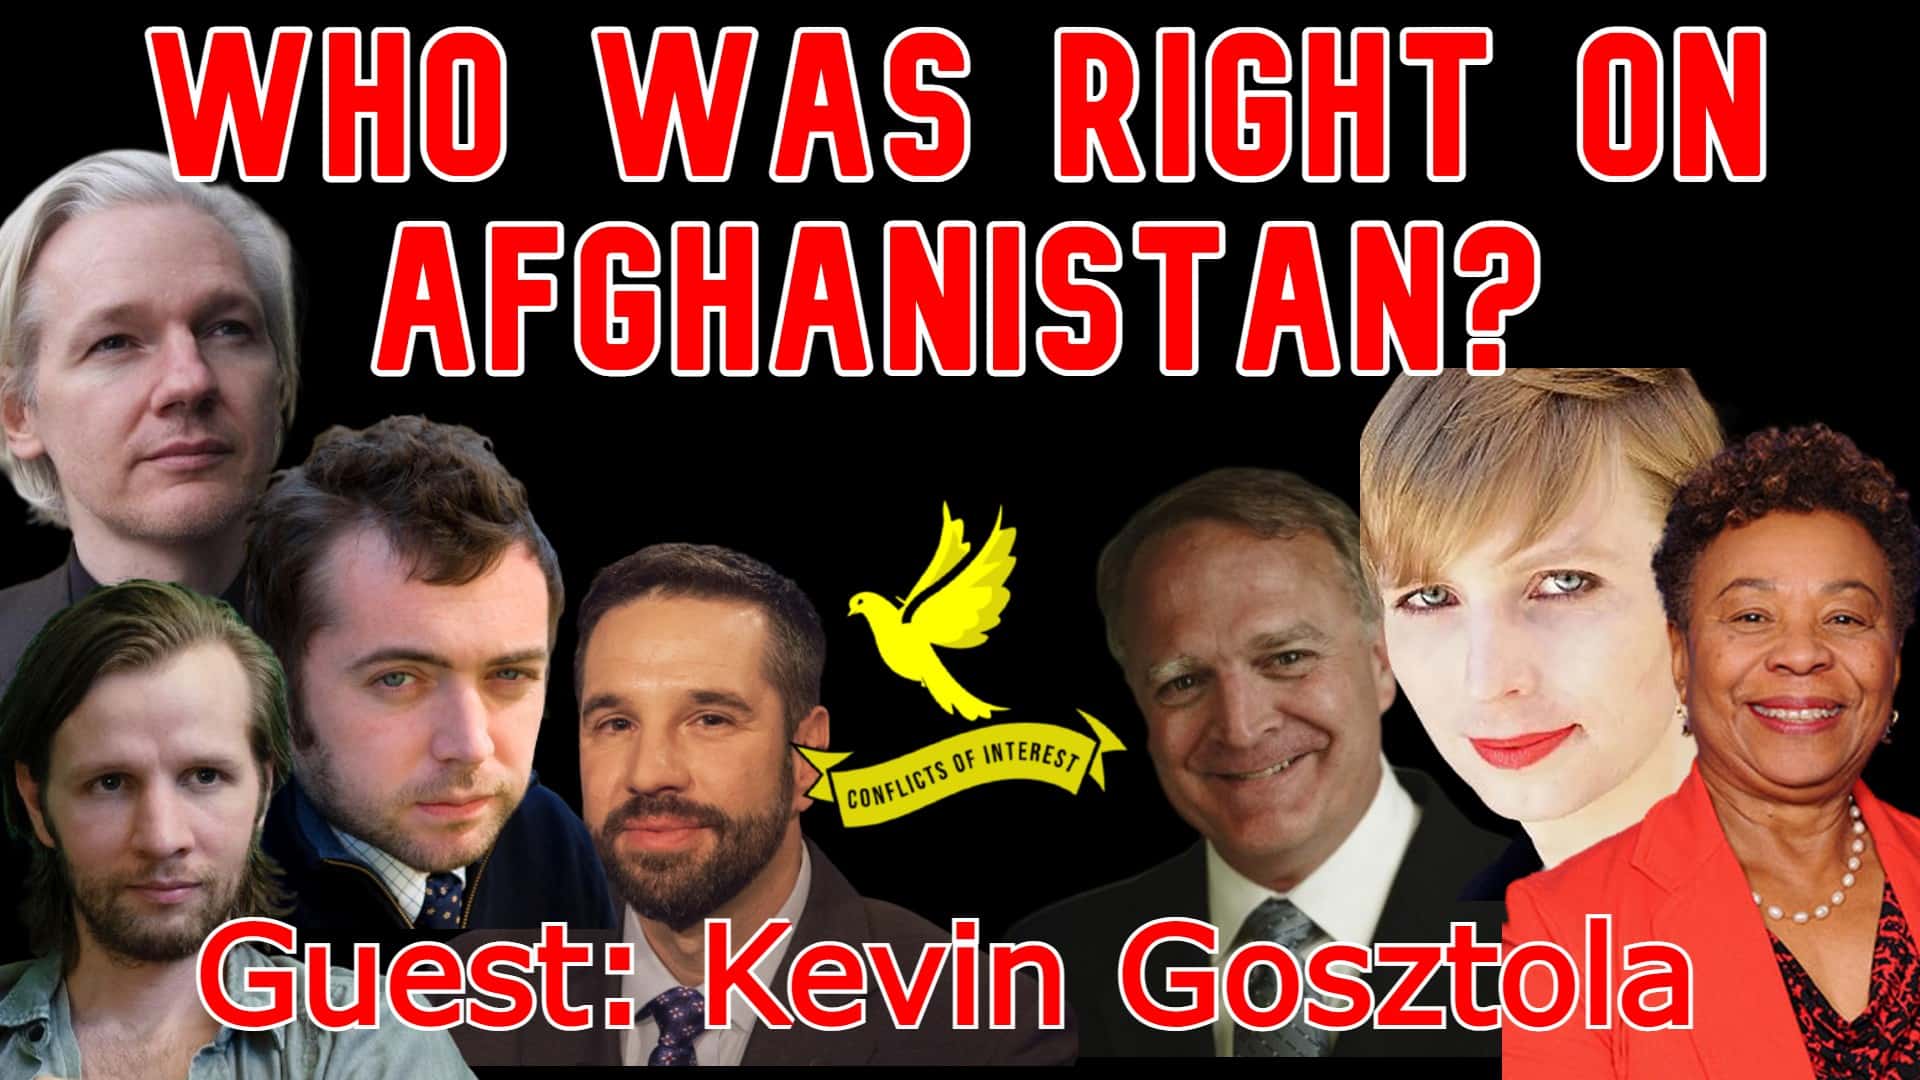 COI #159: The People Who Were Right About Afghanistan